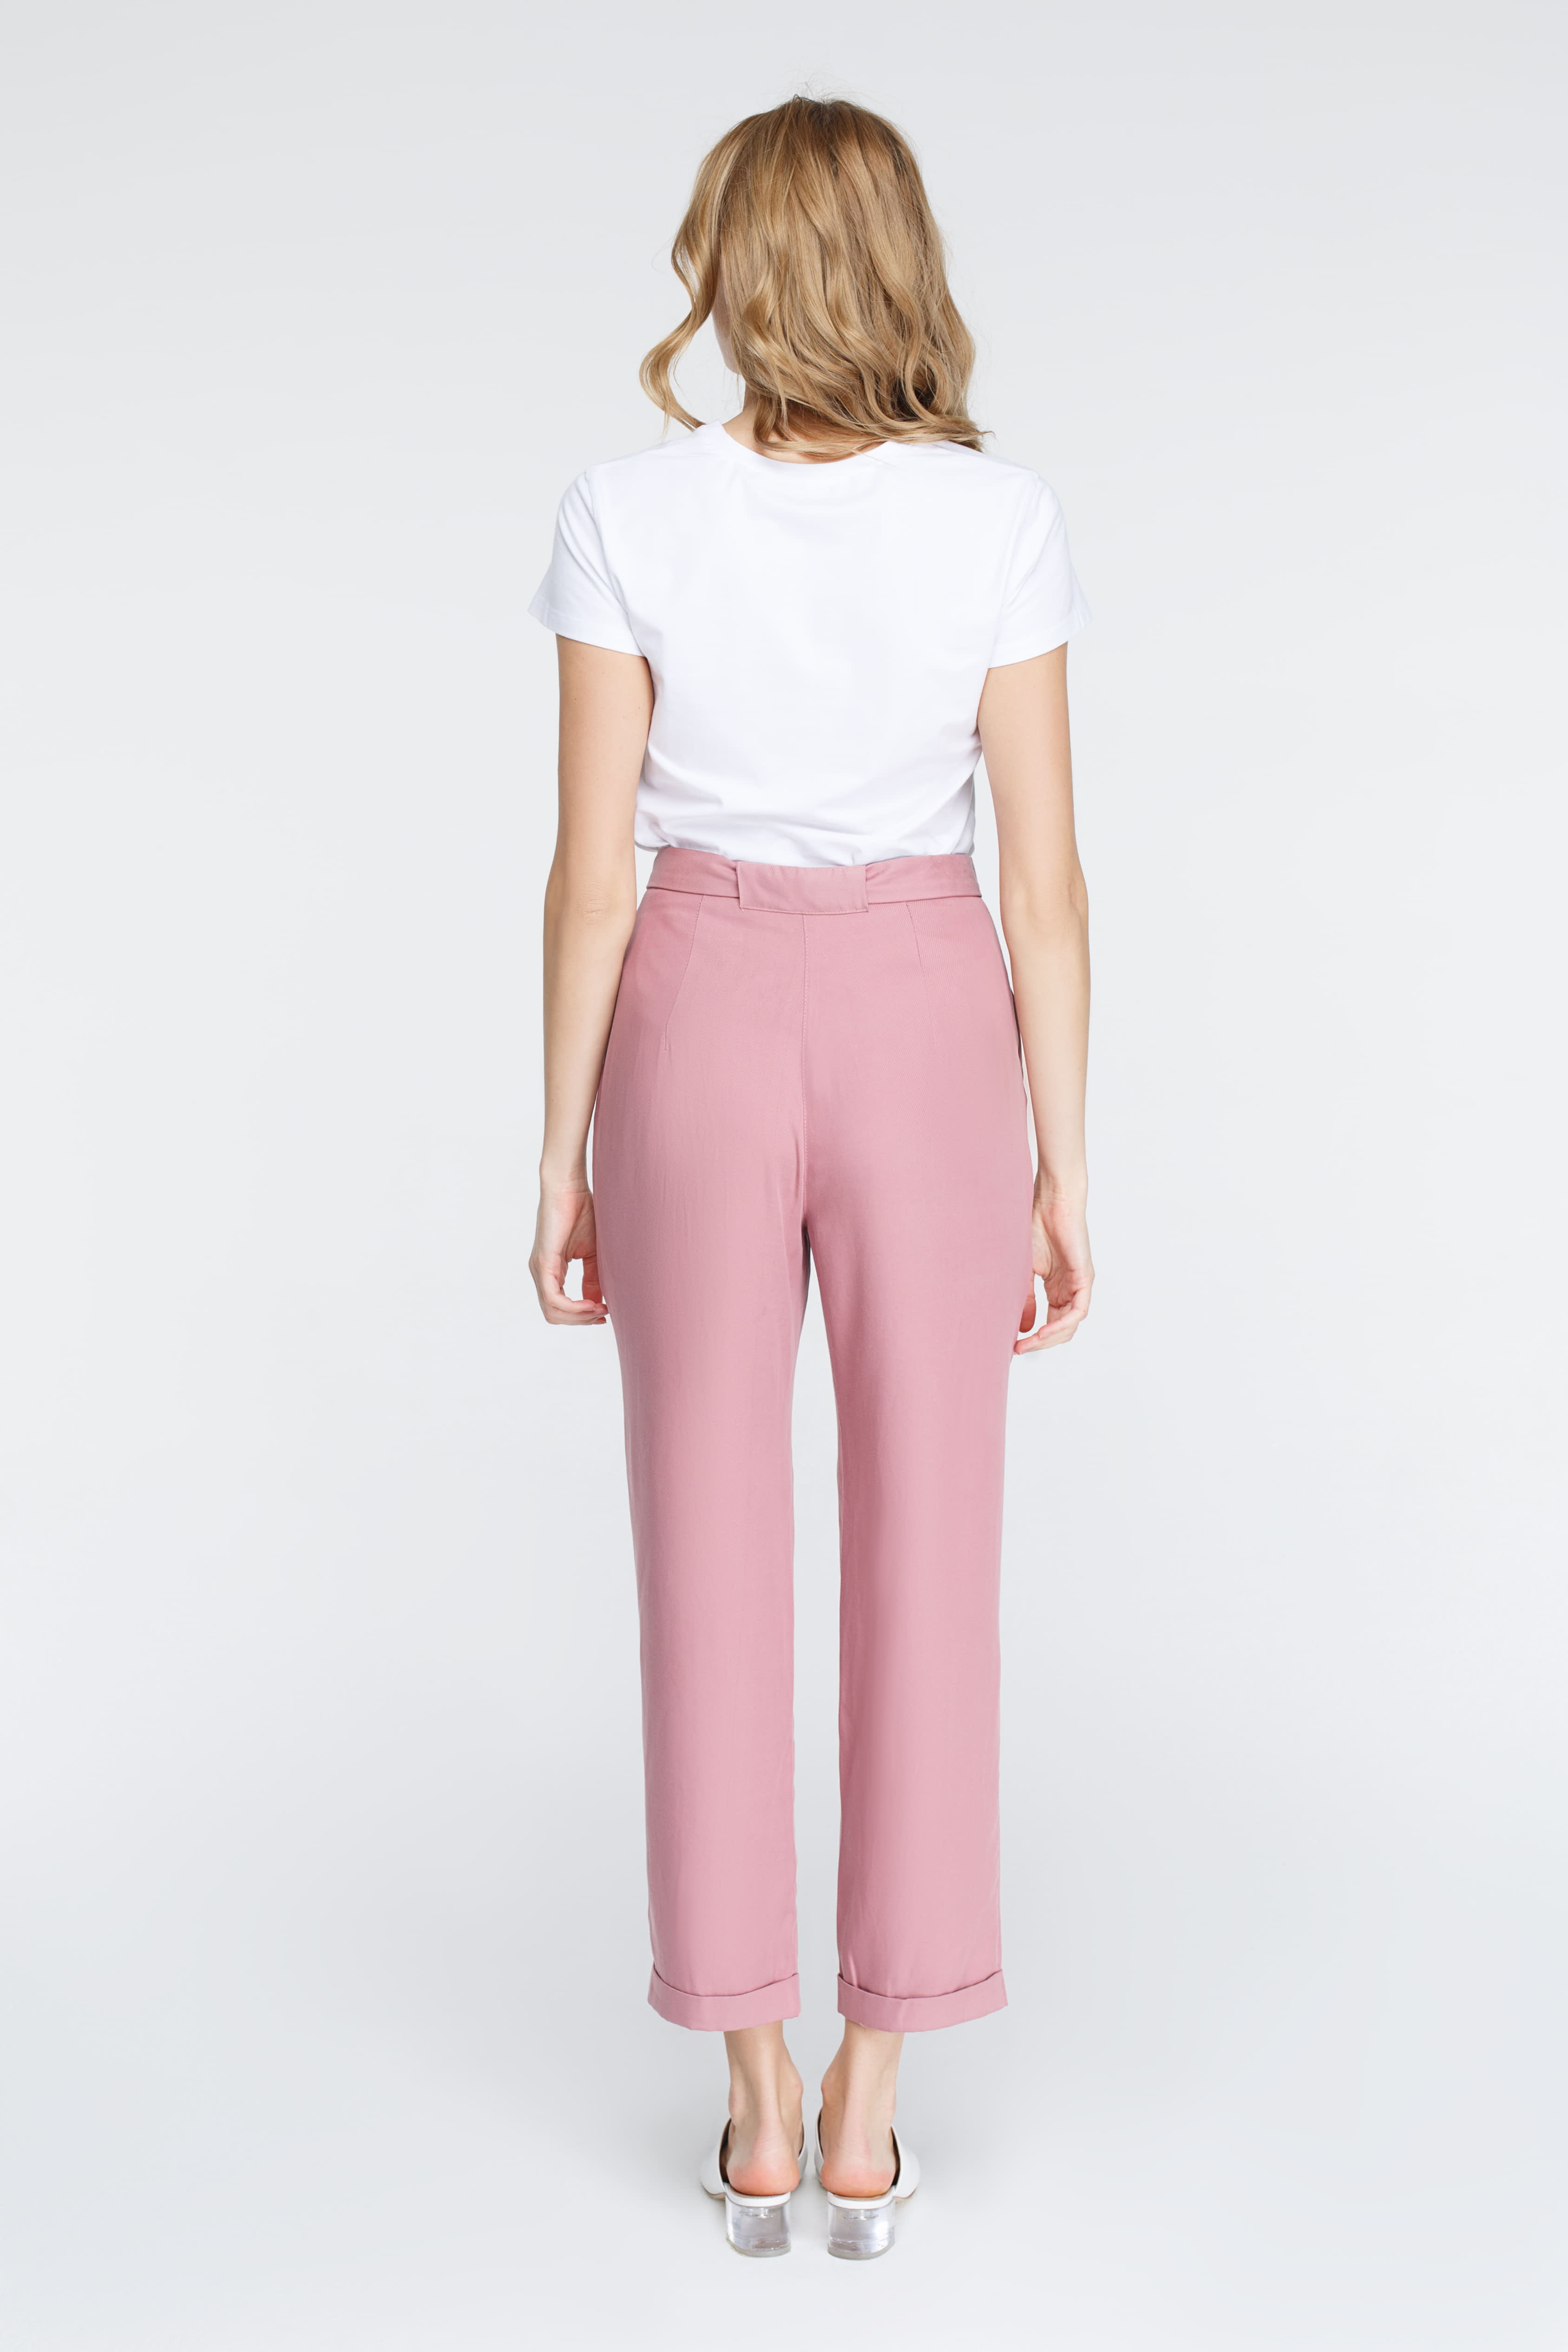 Pink pants with belt, photo 6